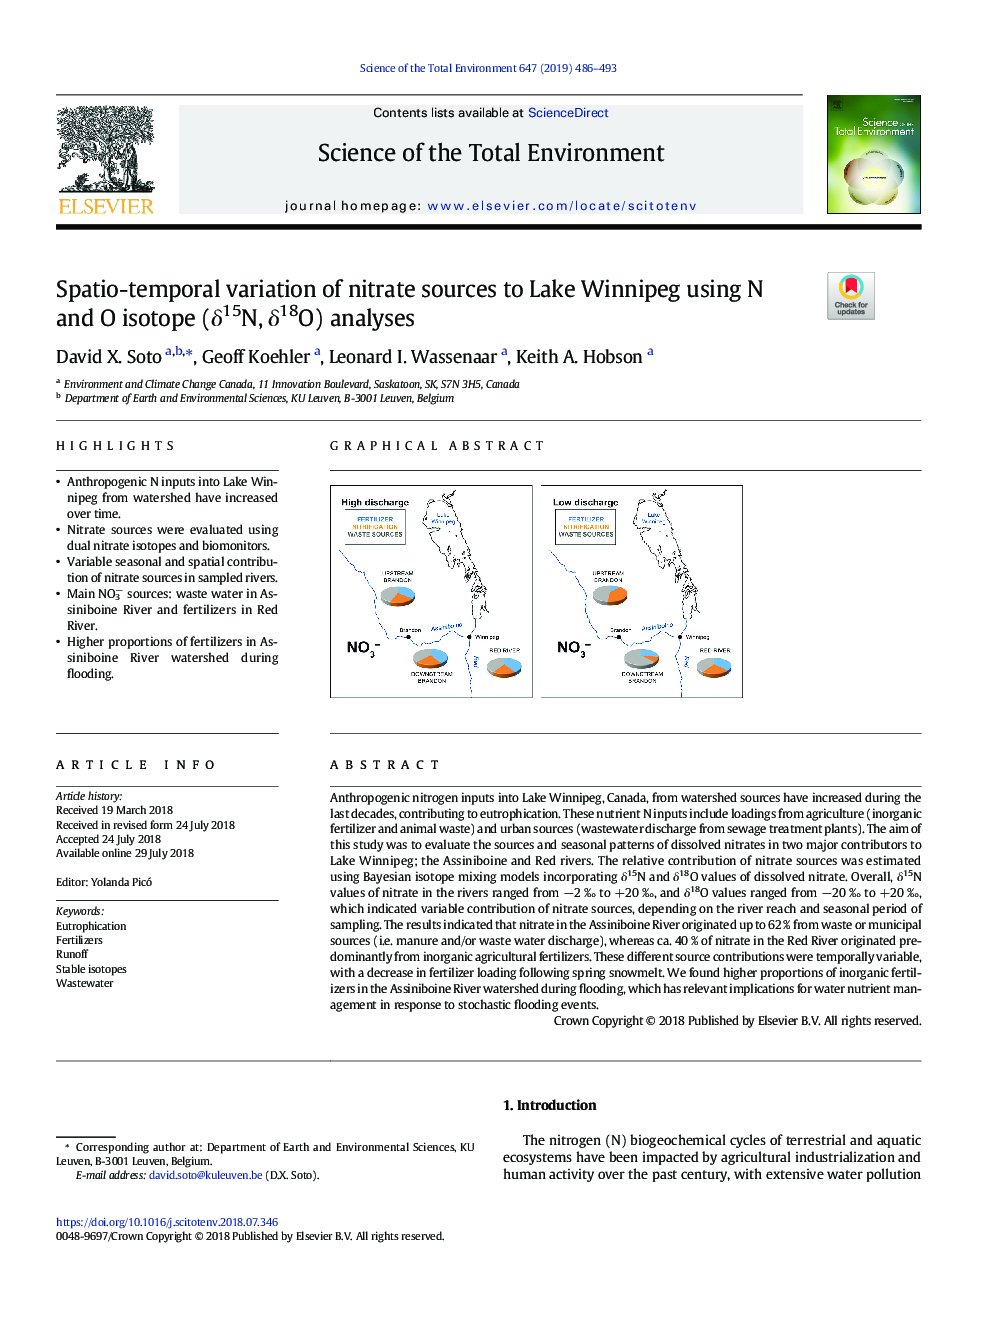 Spatio Temporal Variation Of Nitrate Sources To Lake Winnipeg Using N And O Isotope I